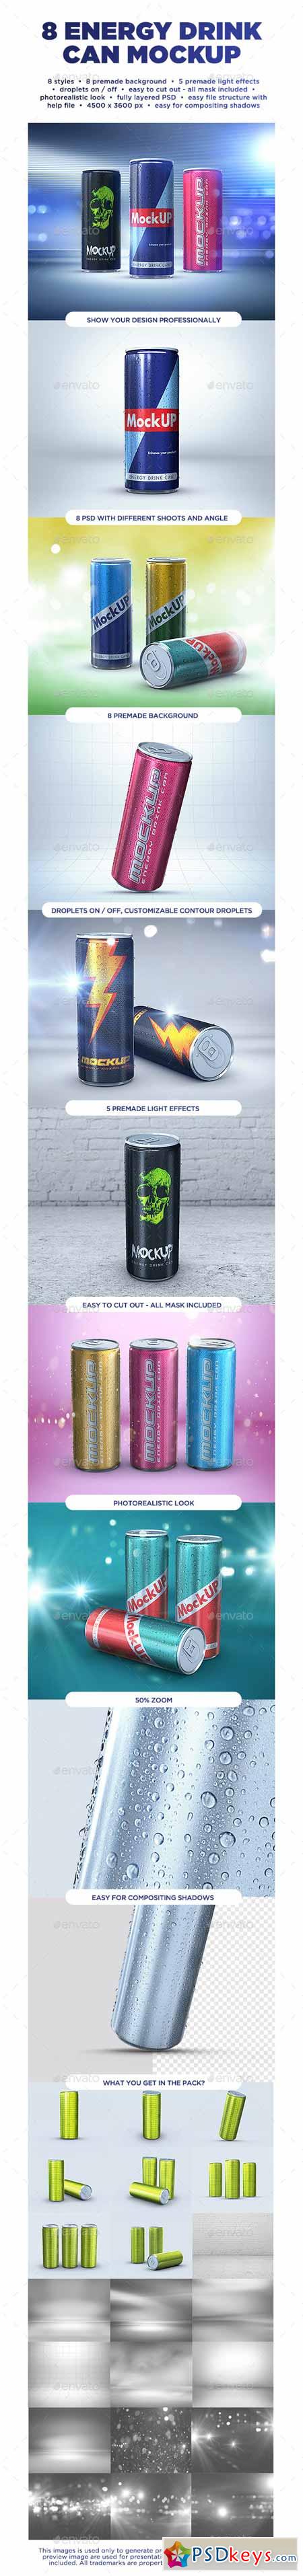 Energy Drink Can Mockup 10707696